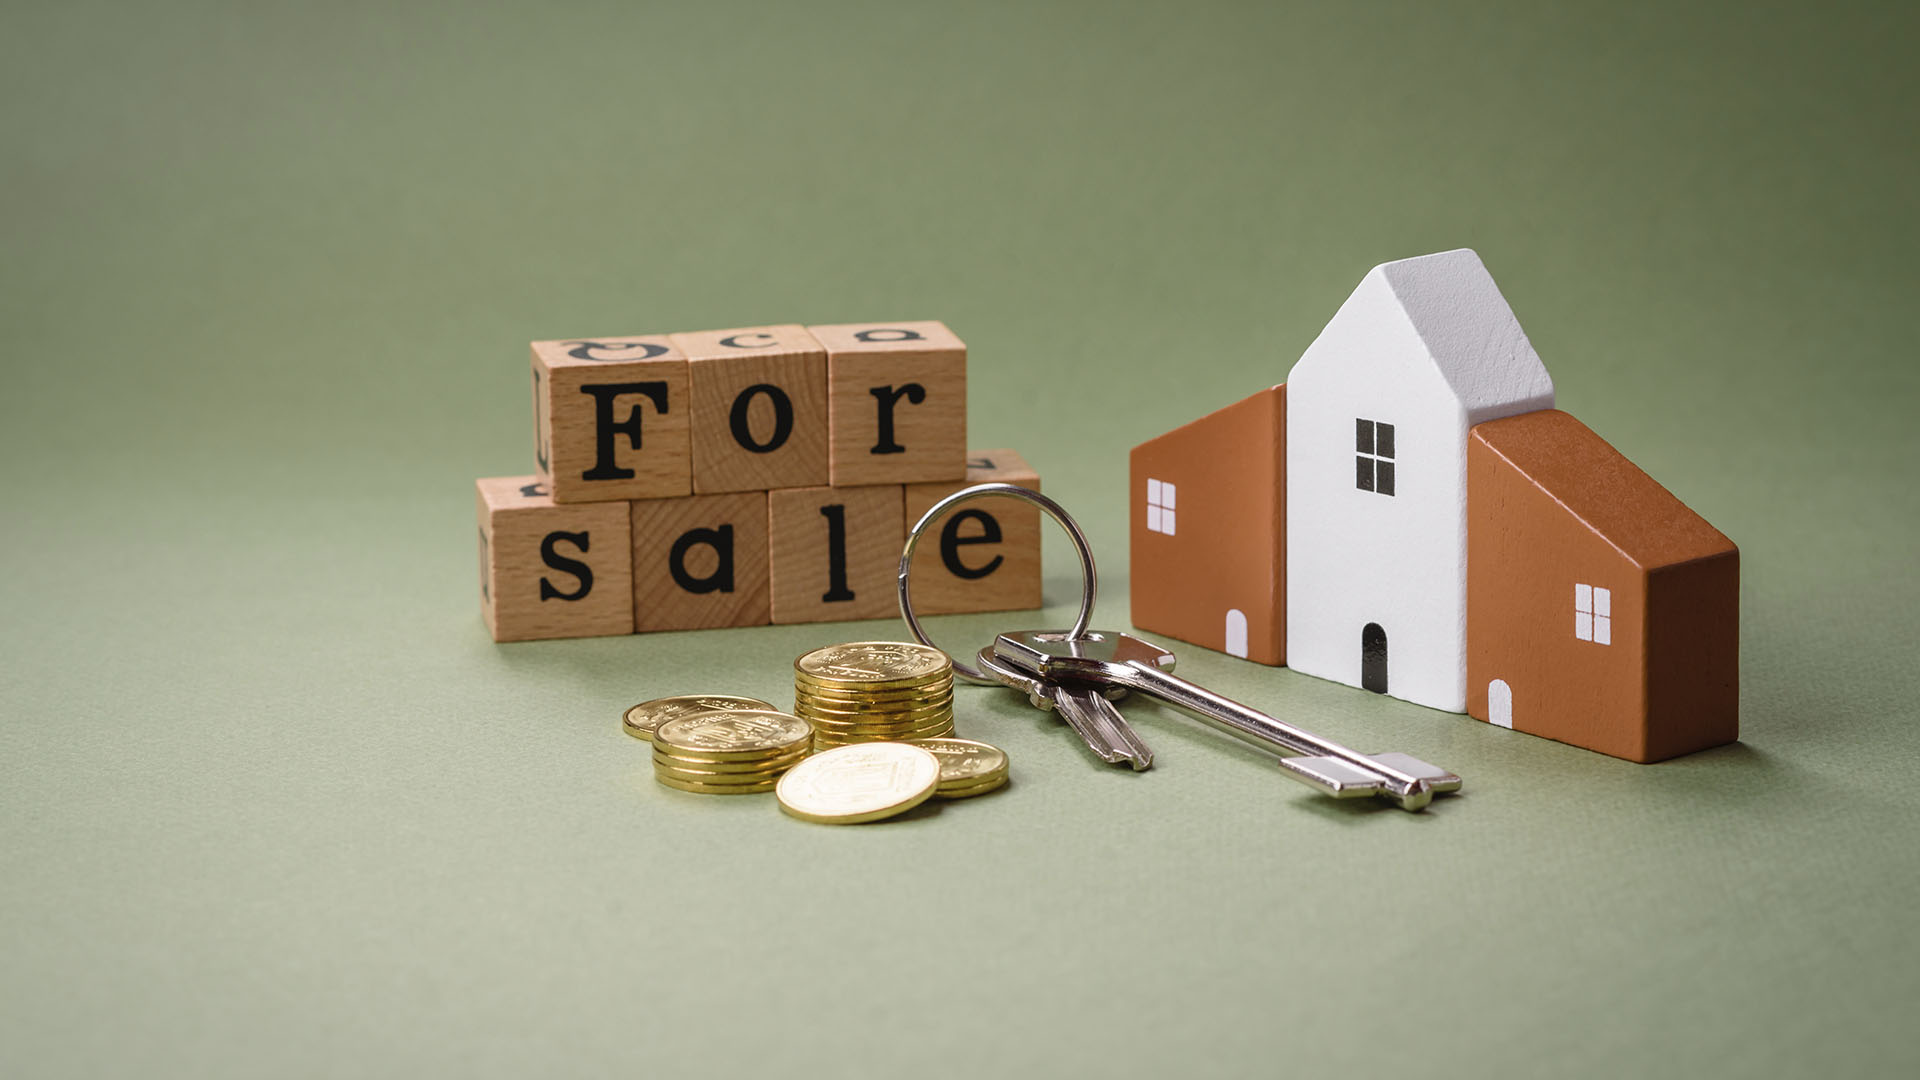 A model house, keys, stacks of coins, and wooden blocks spelling "FOR SALE" are arranged on a green background. Is renting ruining your future?